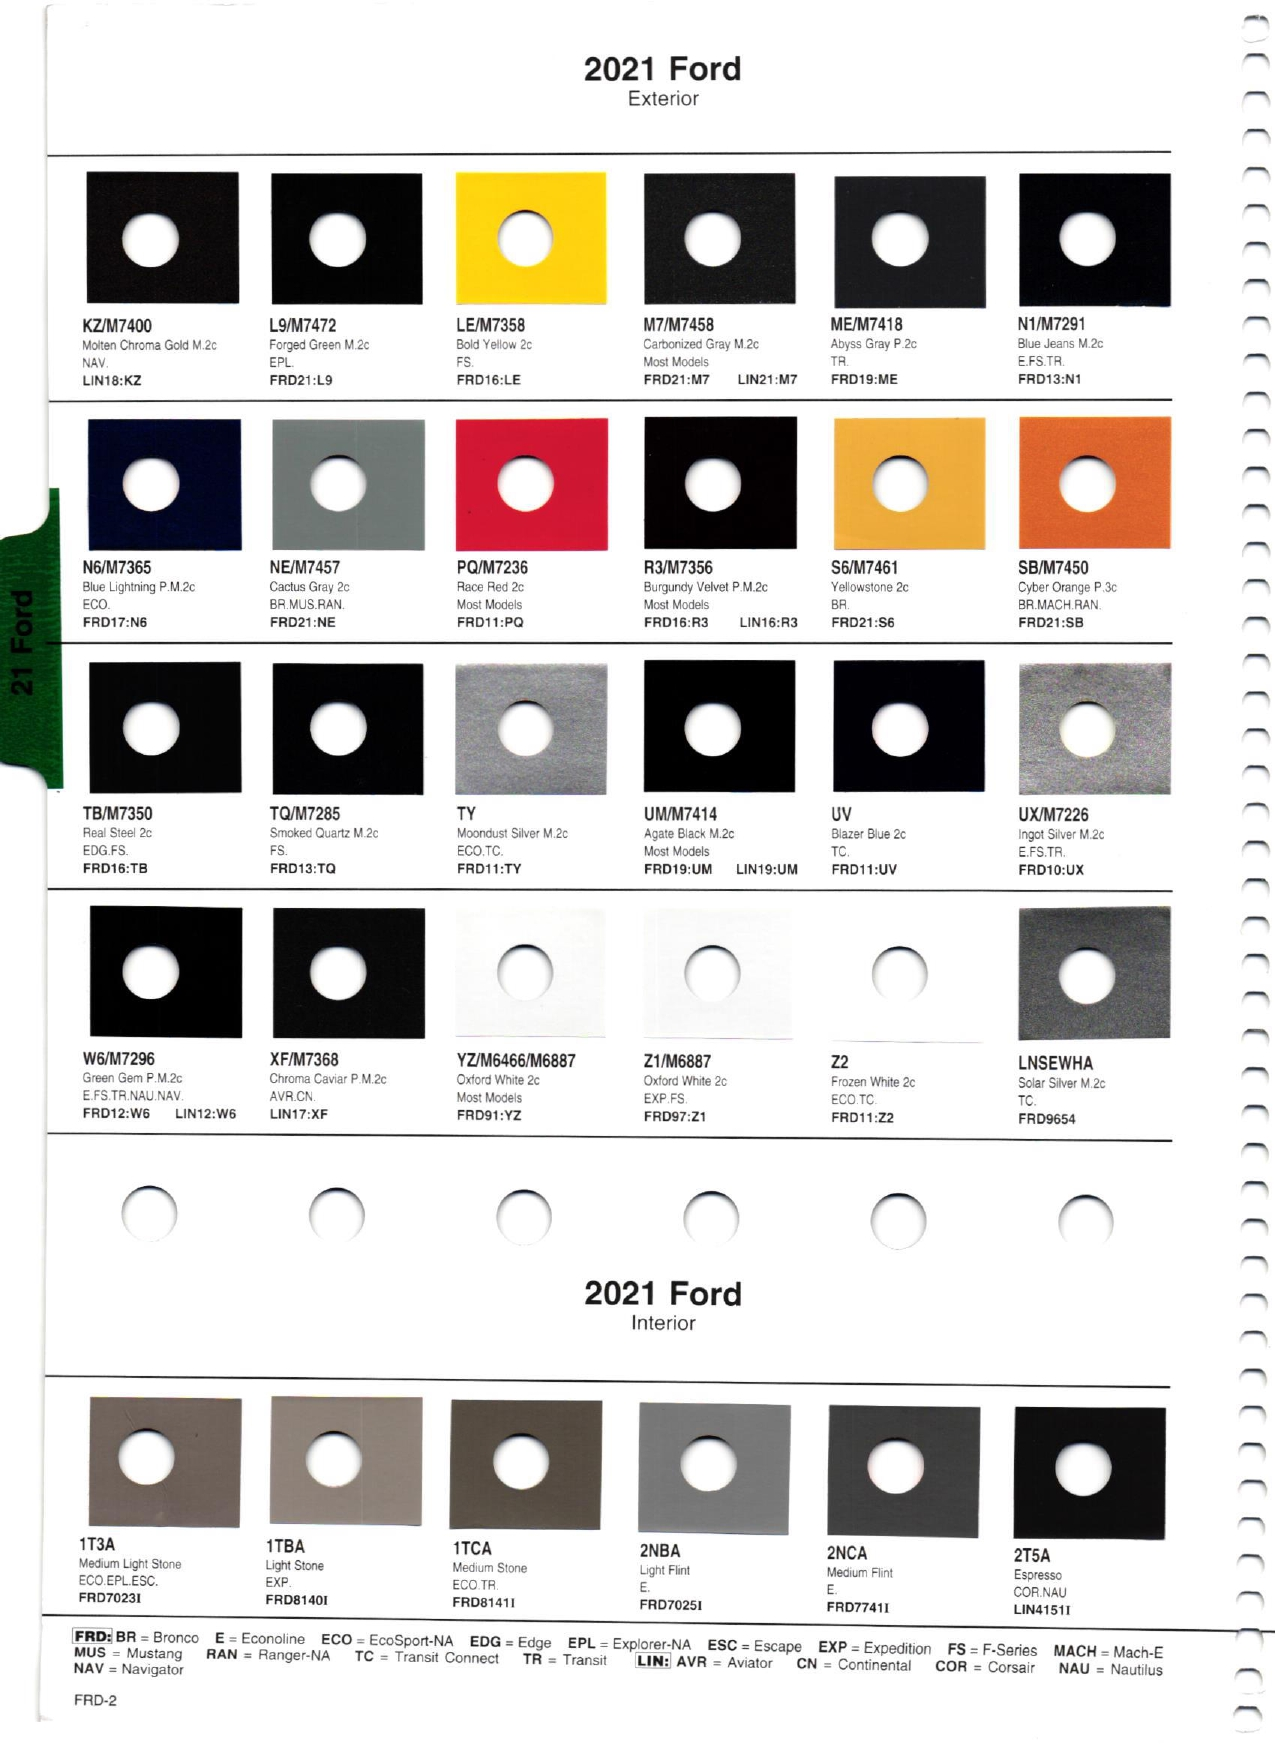 Exterior paint colors for Ford and Lincoln vehicles and their ordering codes and stock numbers